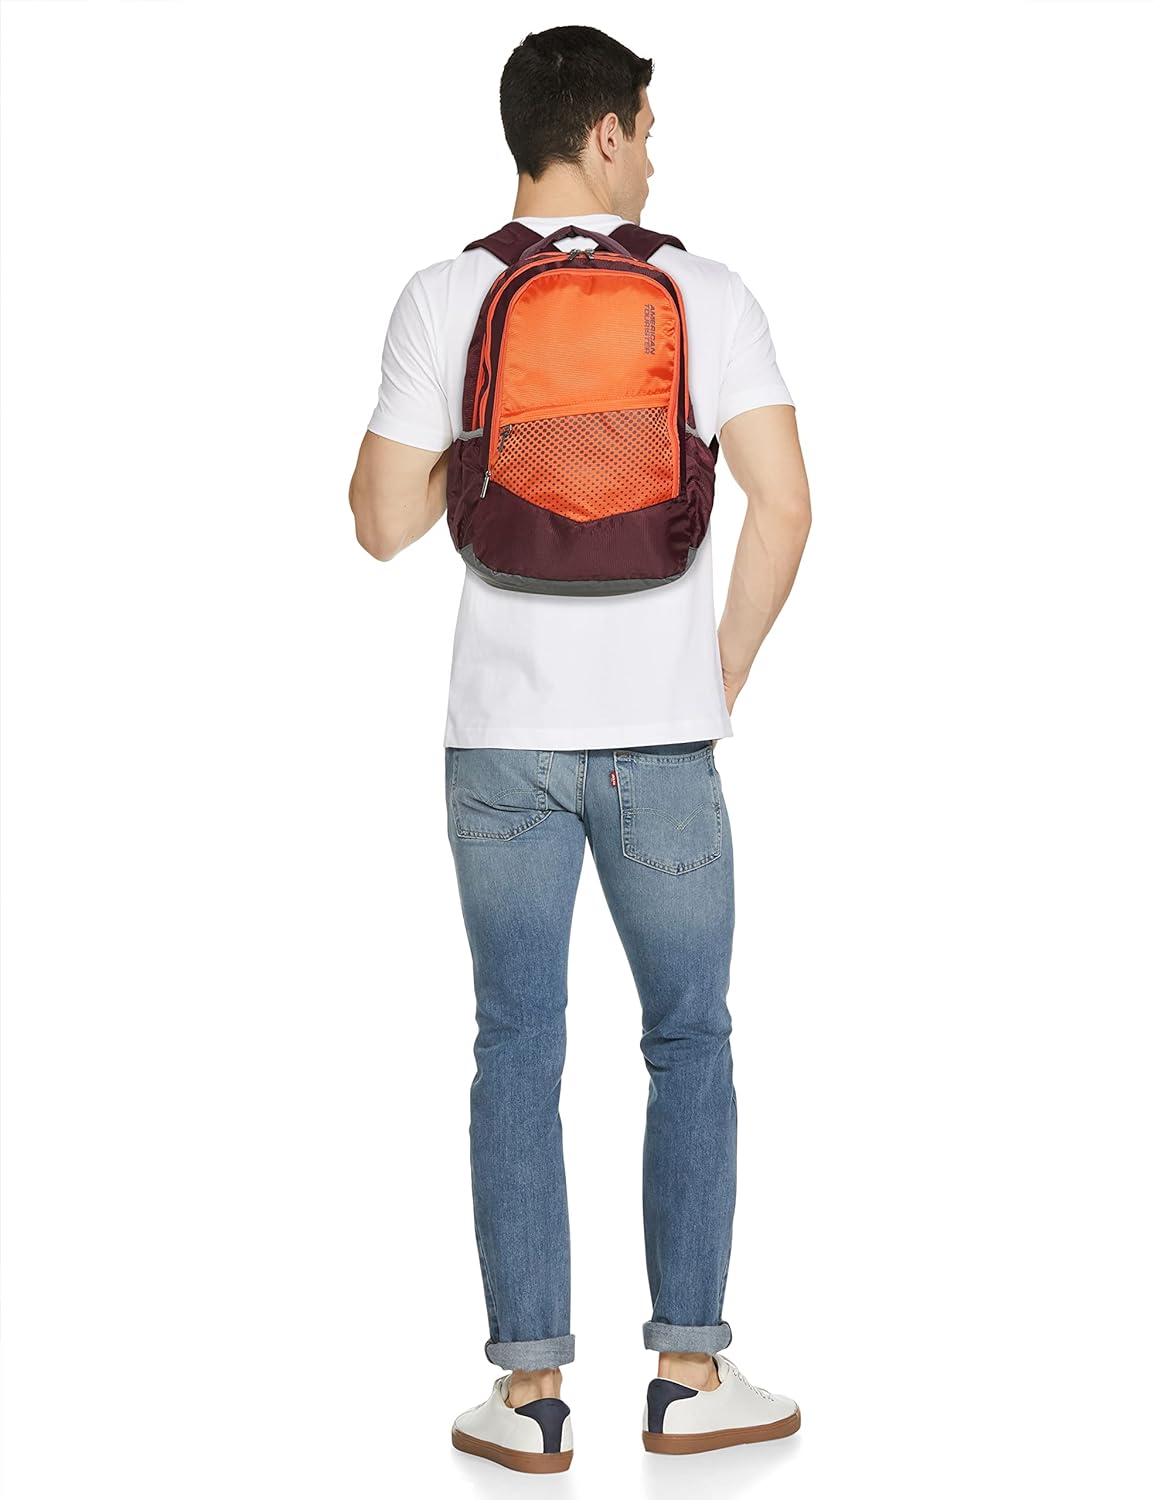 American Tourister Casual Backpack